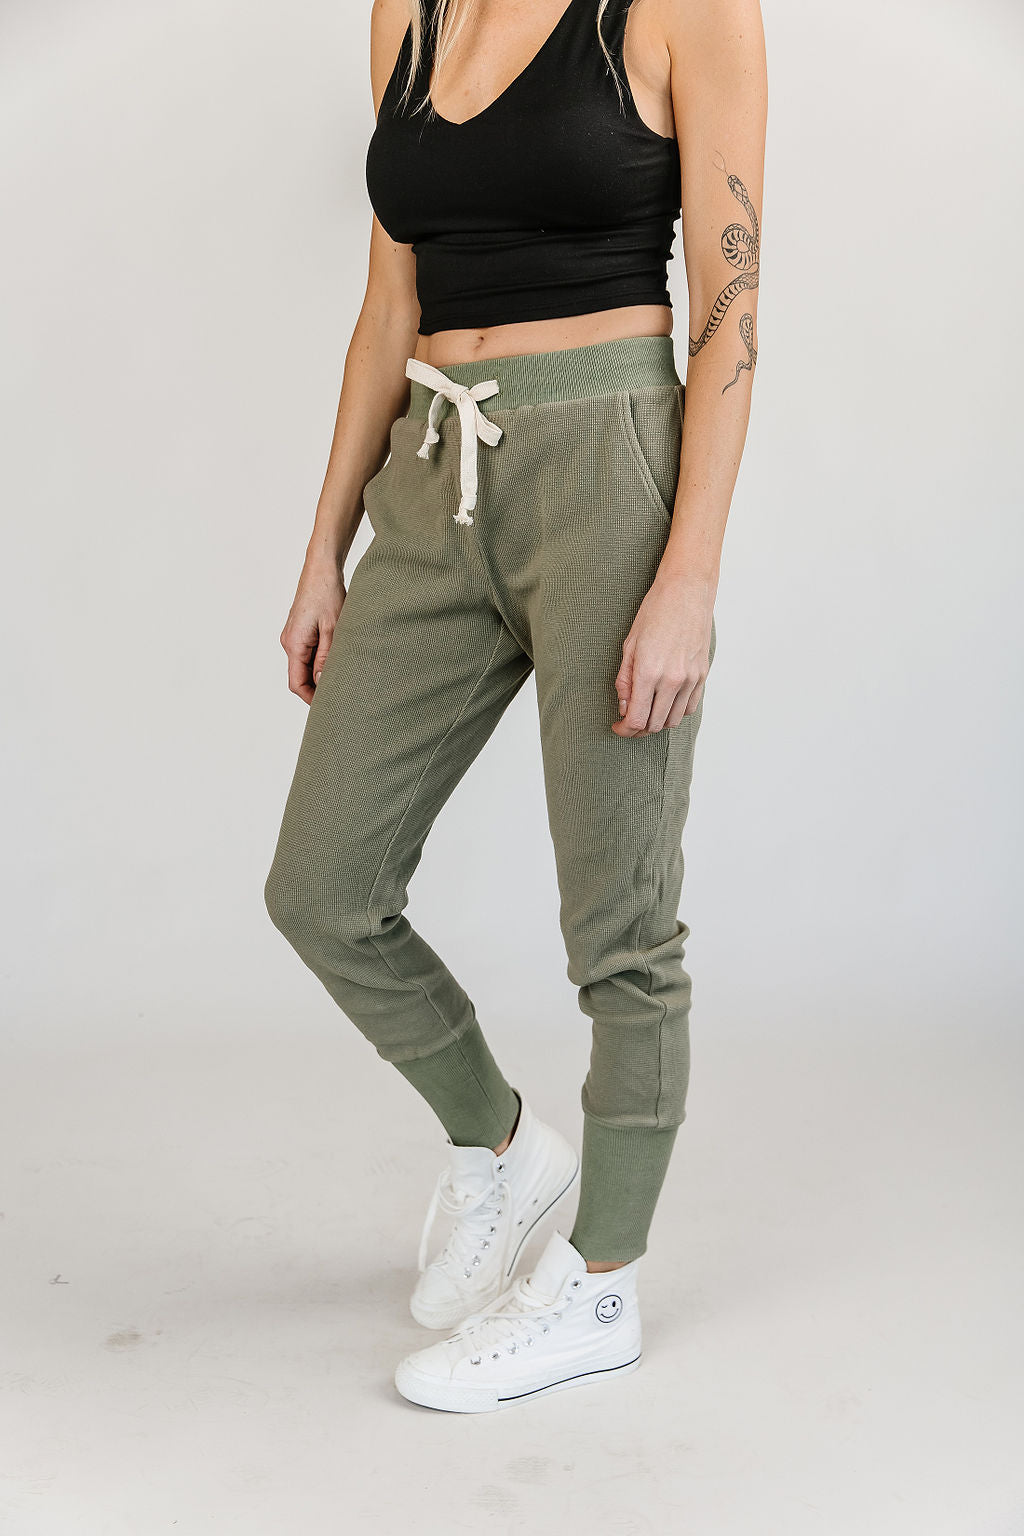 ONLINE ONLY! Waffle Knit Joggers- Willow